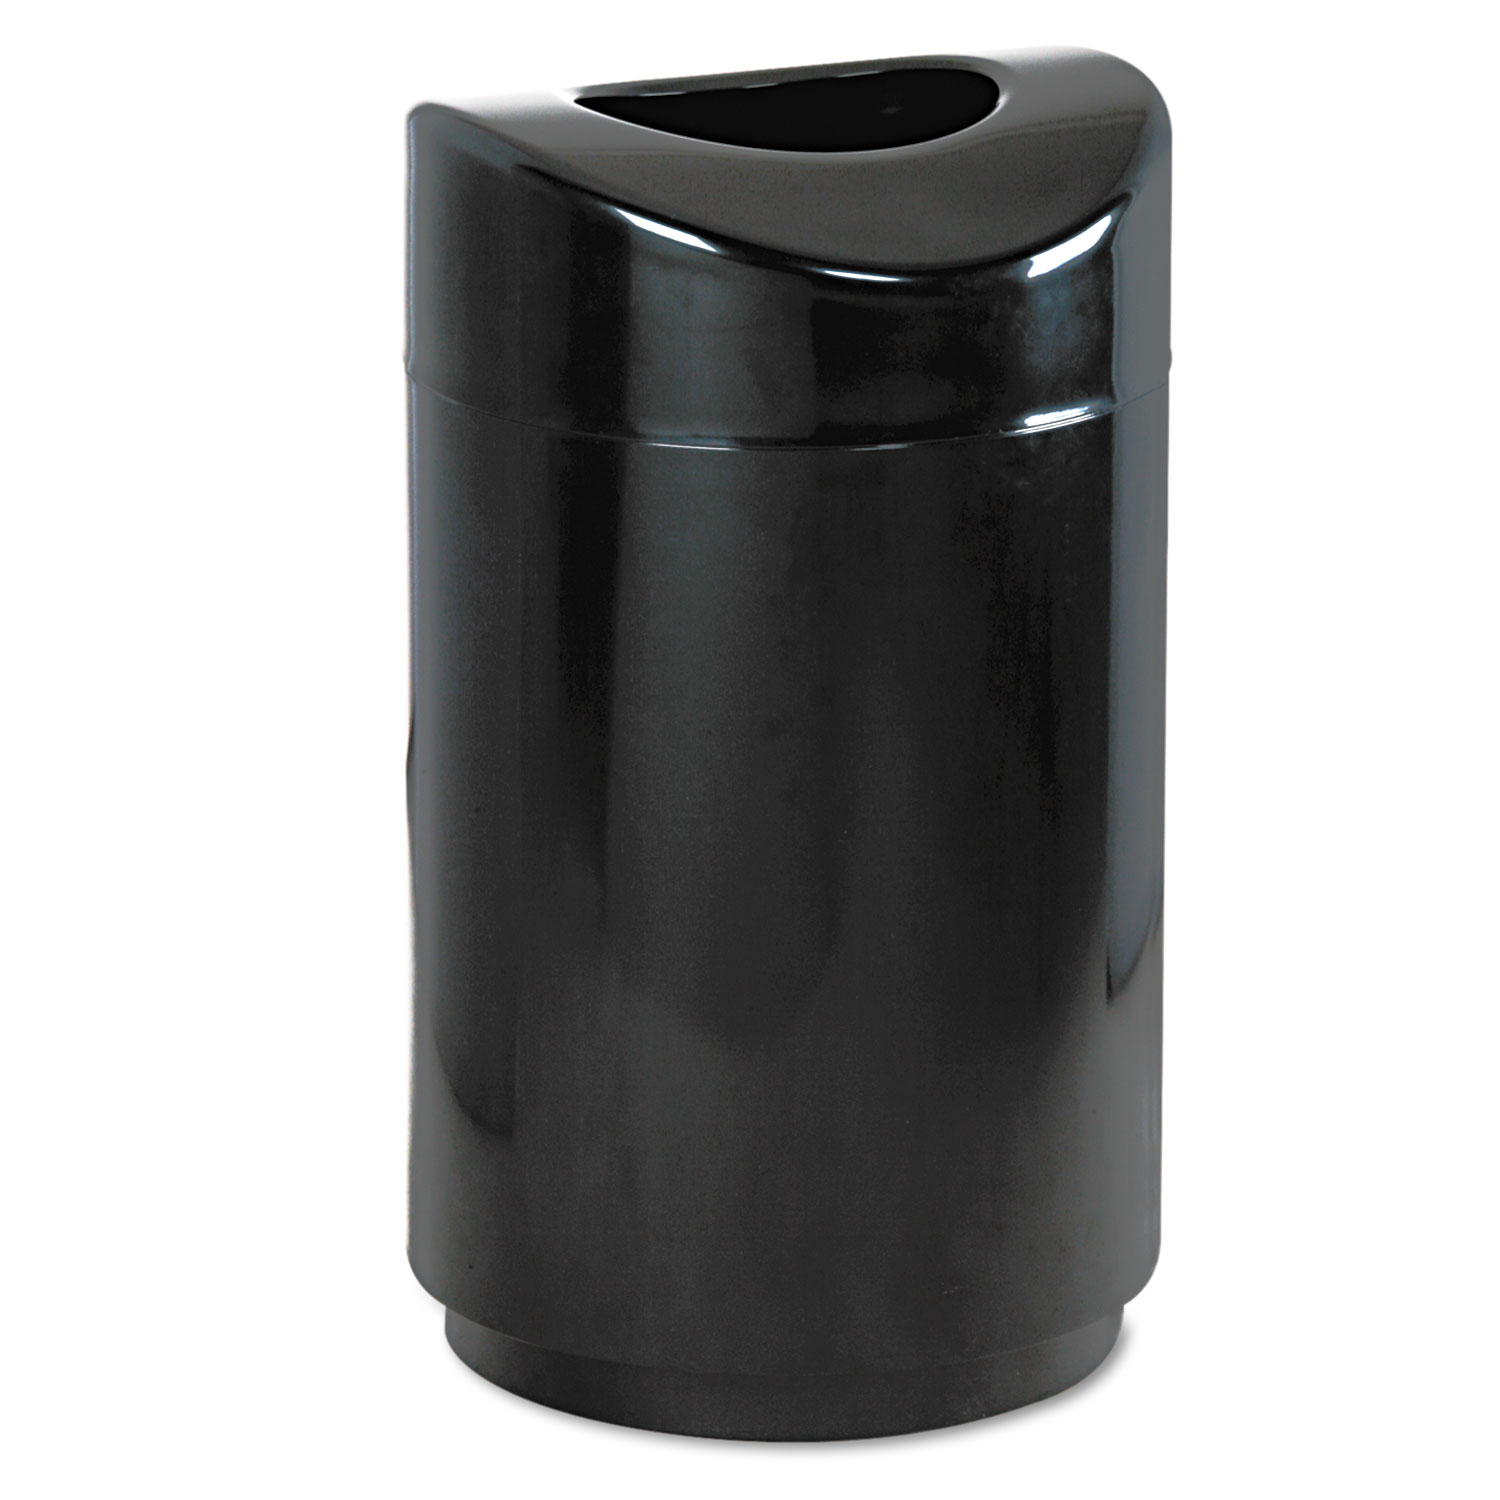  Rubbermaid Commercial FGR2030EPLBK Eclipse Open Top Waste Receptacle, Round, Steel, 30 gal, Black (RCPR2030EBK) 